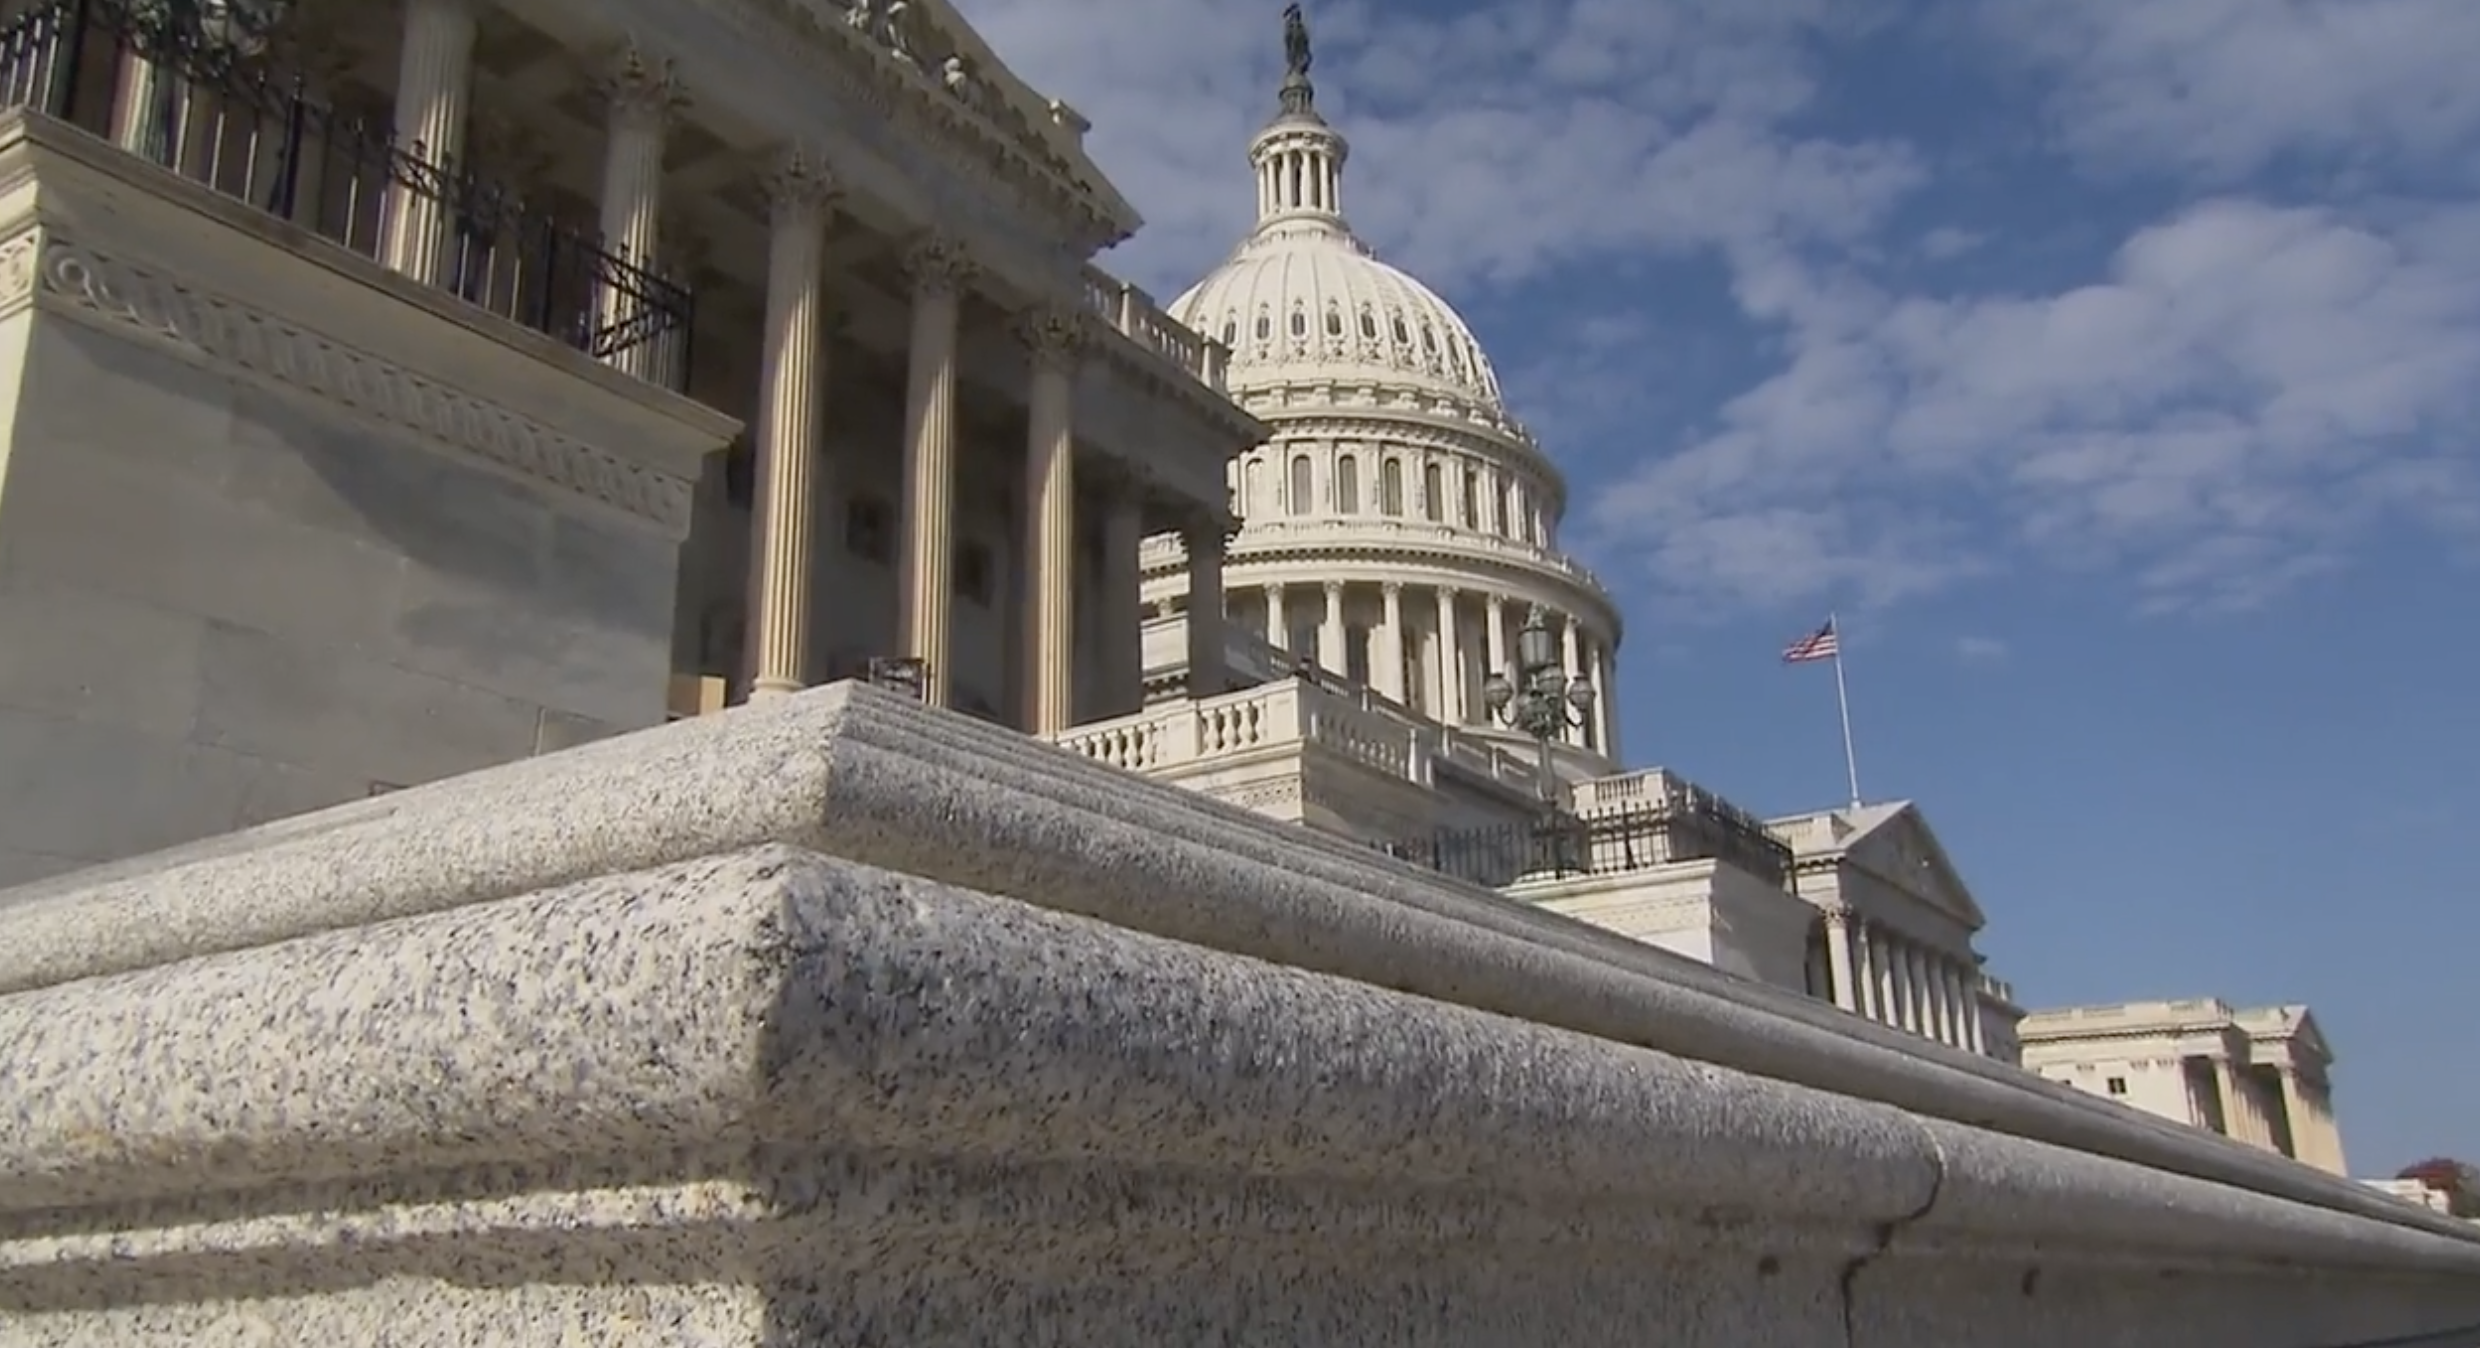 Congressional Leaders Reach Deal on Remaining Spending Bills, Both Chambers Must Act Fast